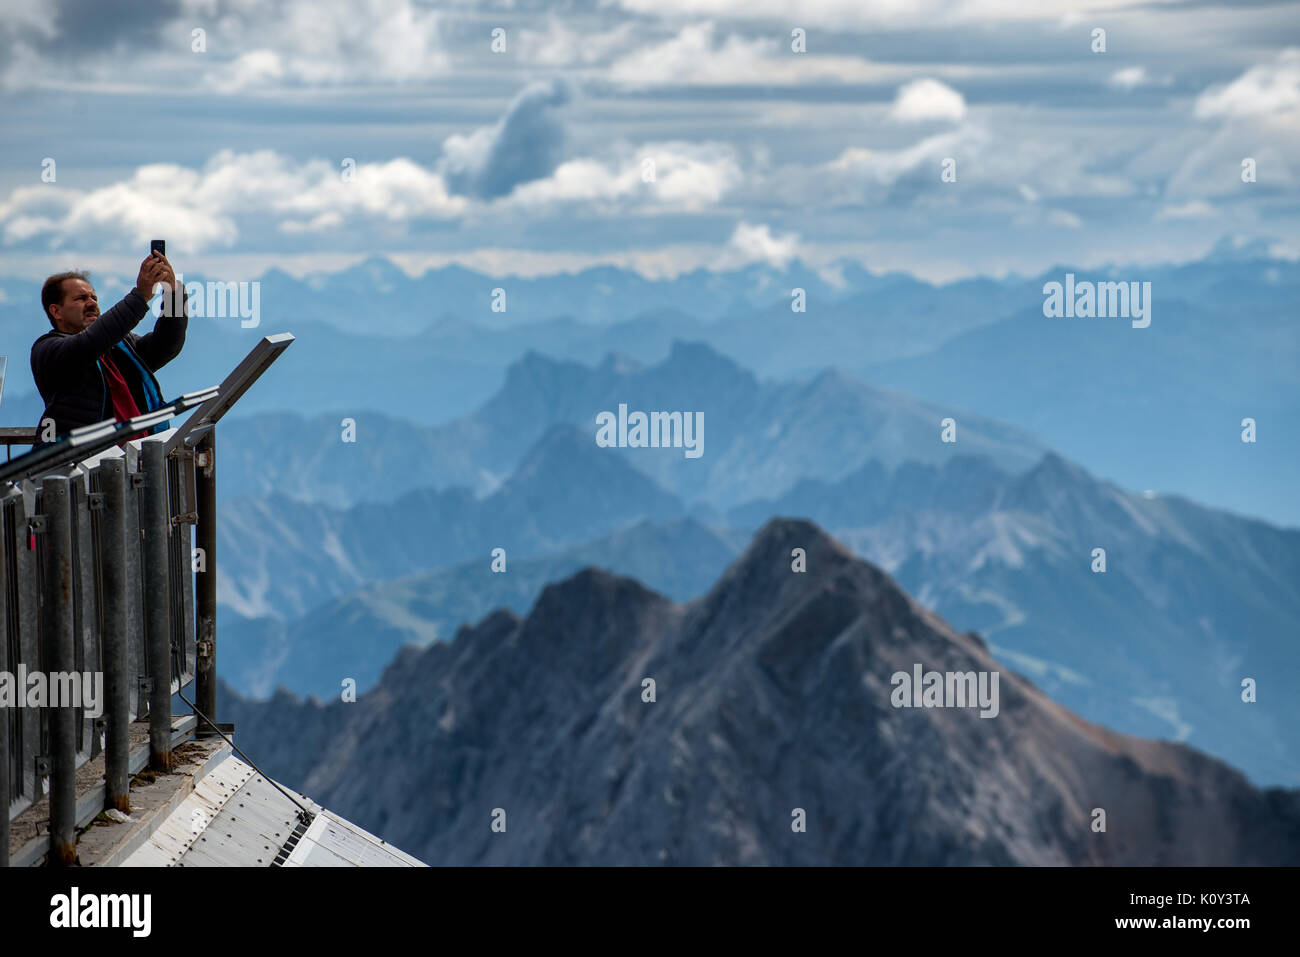 A man takes a selfie with a smart phone at the summit of the Zugspitze mountain on the Germany-Austria border. Stock Photo